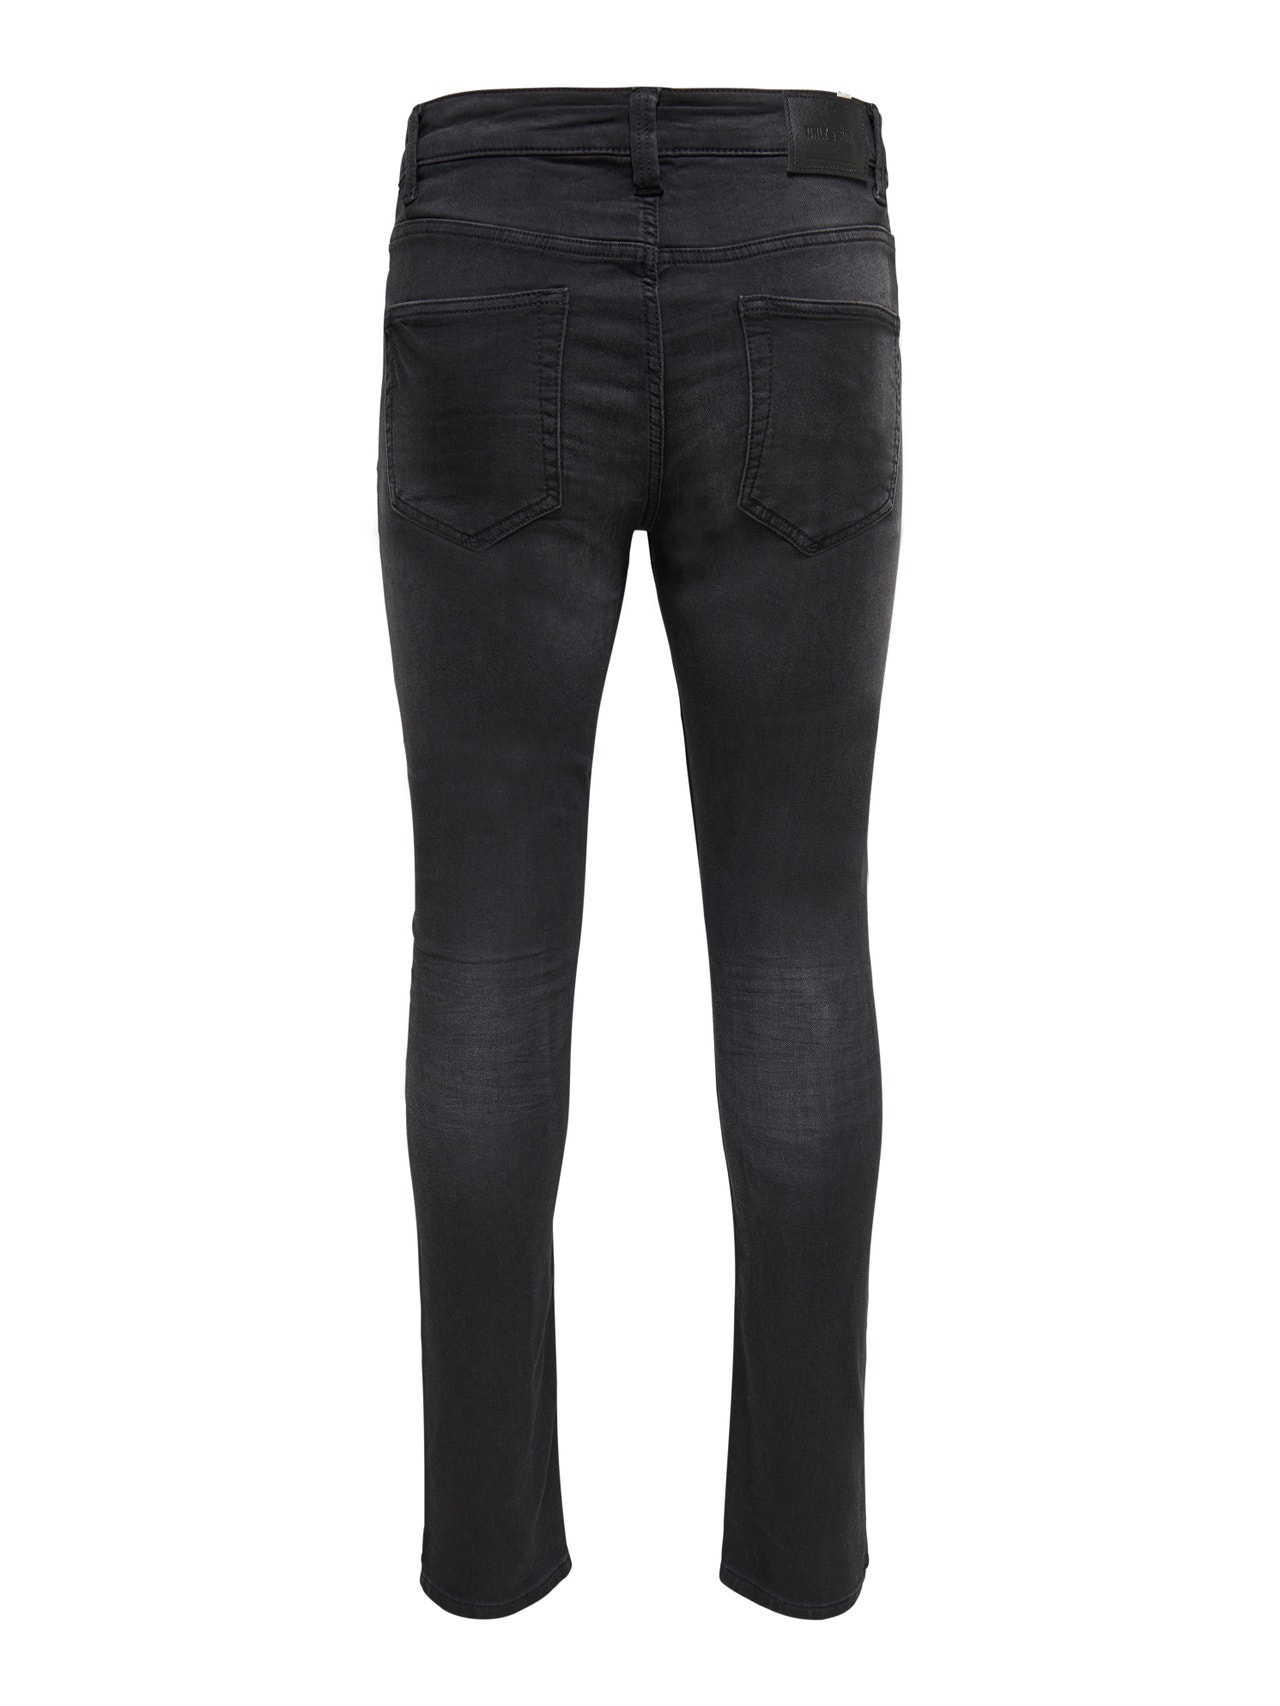 ONLY & SONS Slim Fit Mid rise Jeans -Black - 22007451